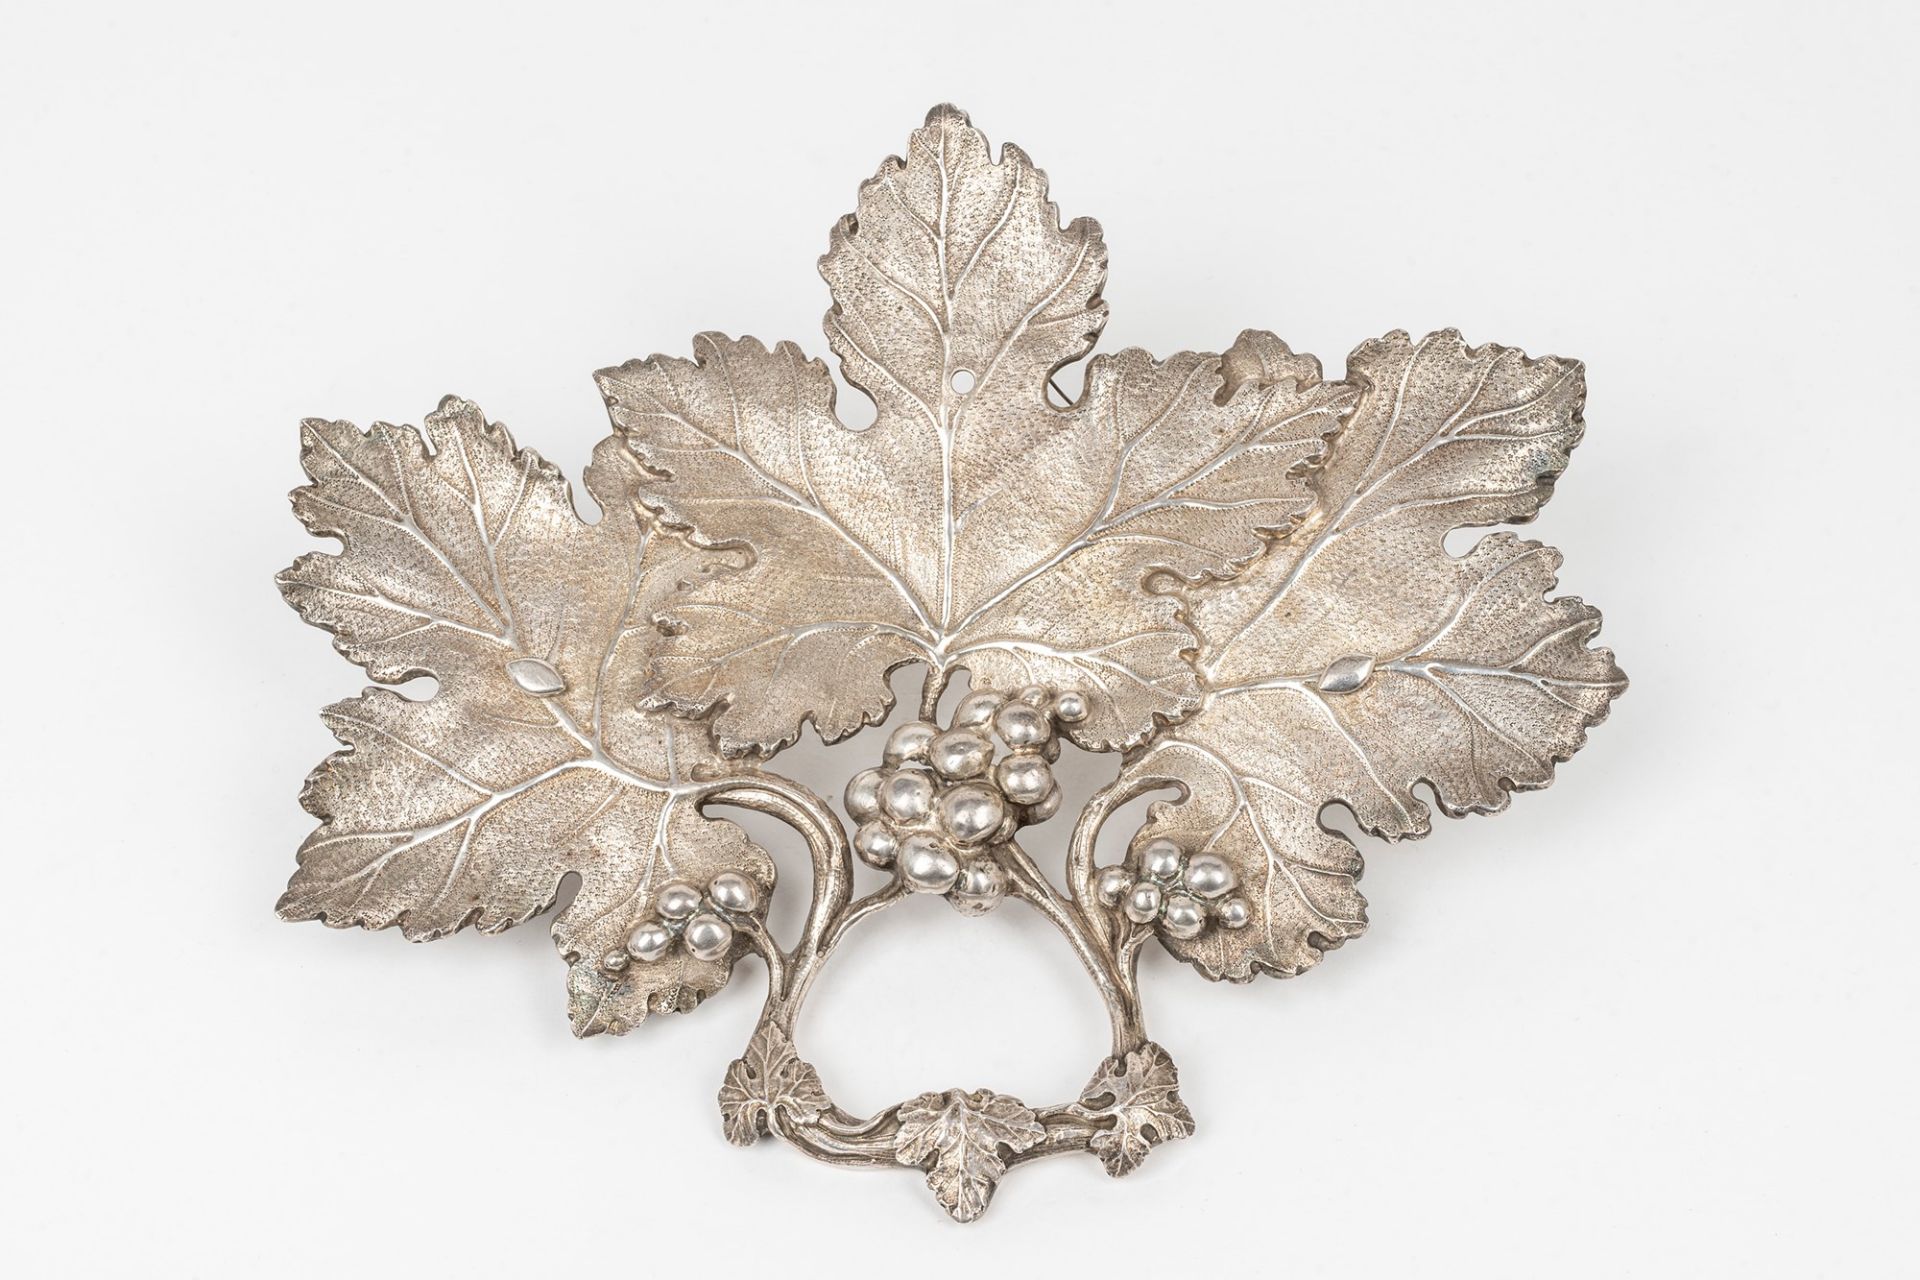 Centerpiece in the shape of embossed and chiselled vine leaves, in silver, Naples, 18th century